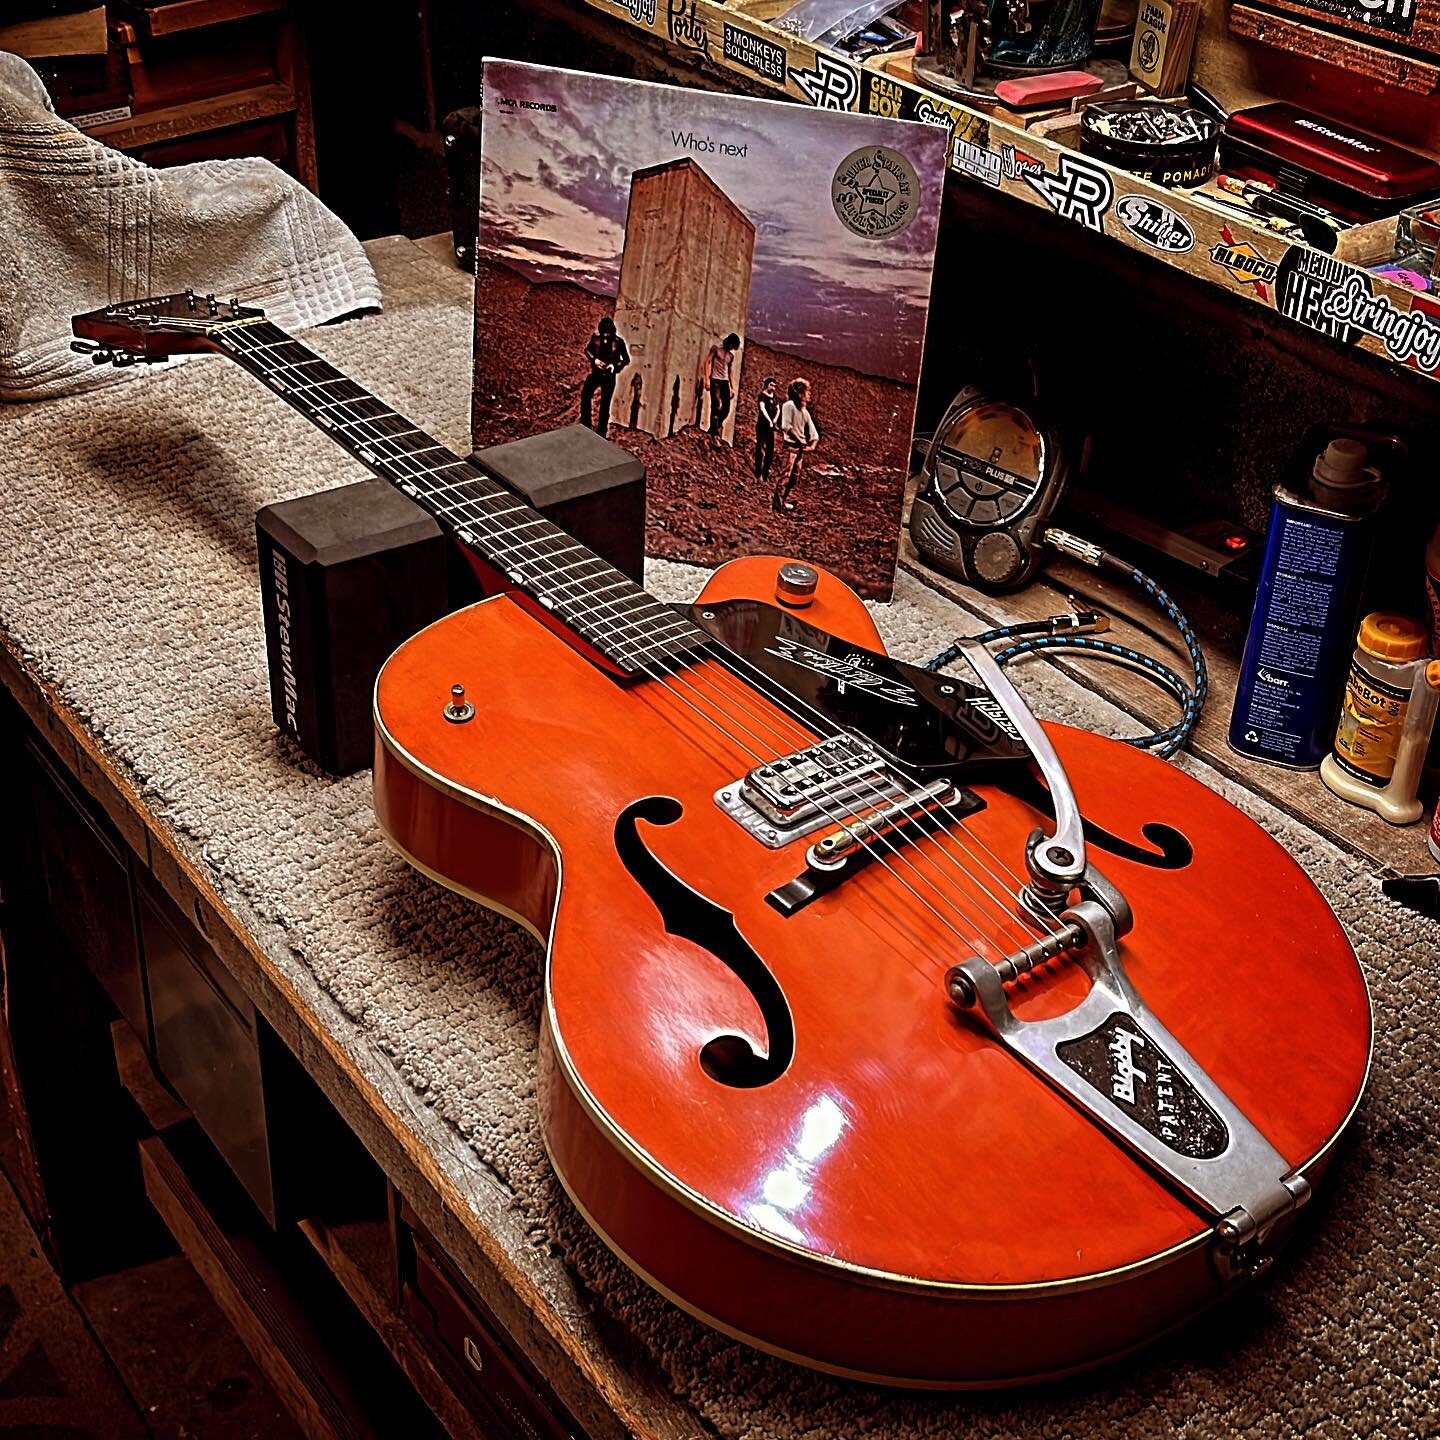 Took a little break this morning to noodle on this 1959 Gretsch Chet Atkins 6119, soon to be called Tennessean. PAF FilterTron, trestle bracing, maybe the best neck I&rsquo;ve ever played, orange finish, rocking-bar bridge, original everything, this 